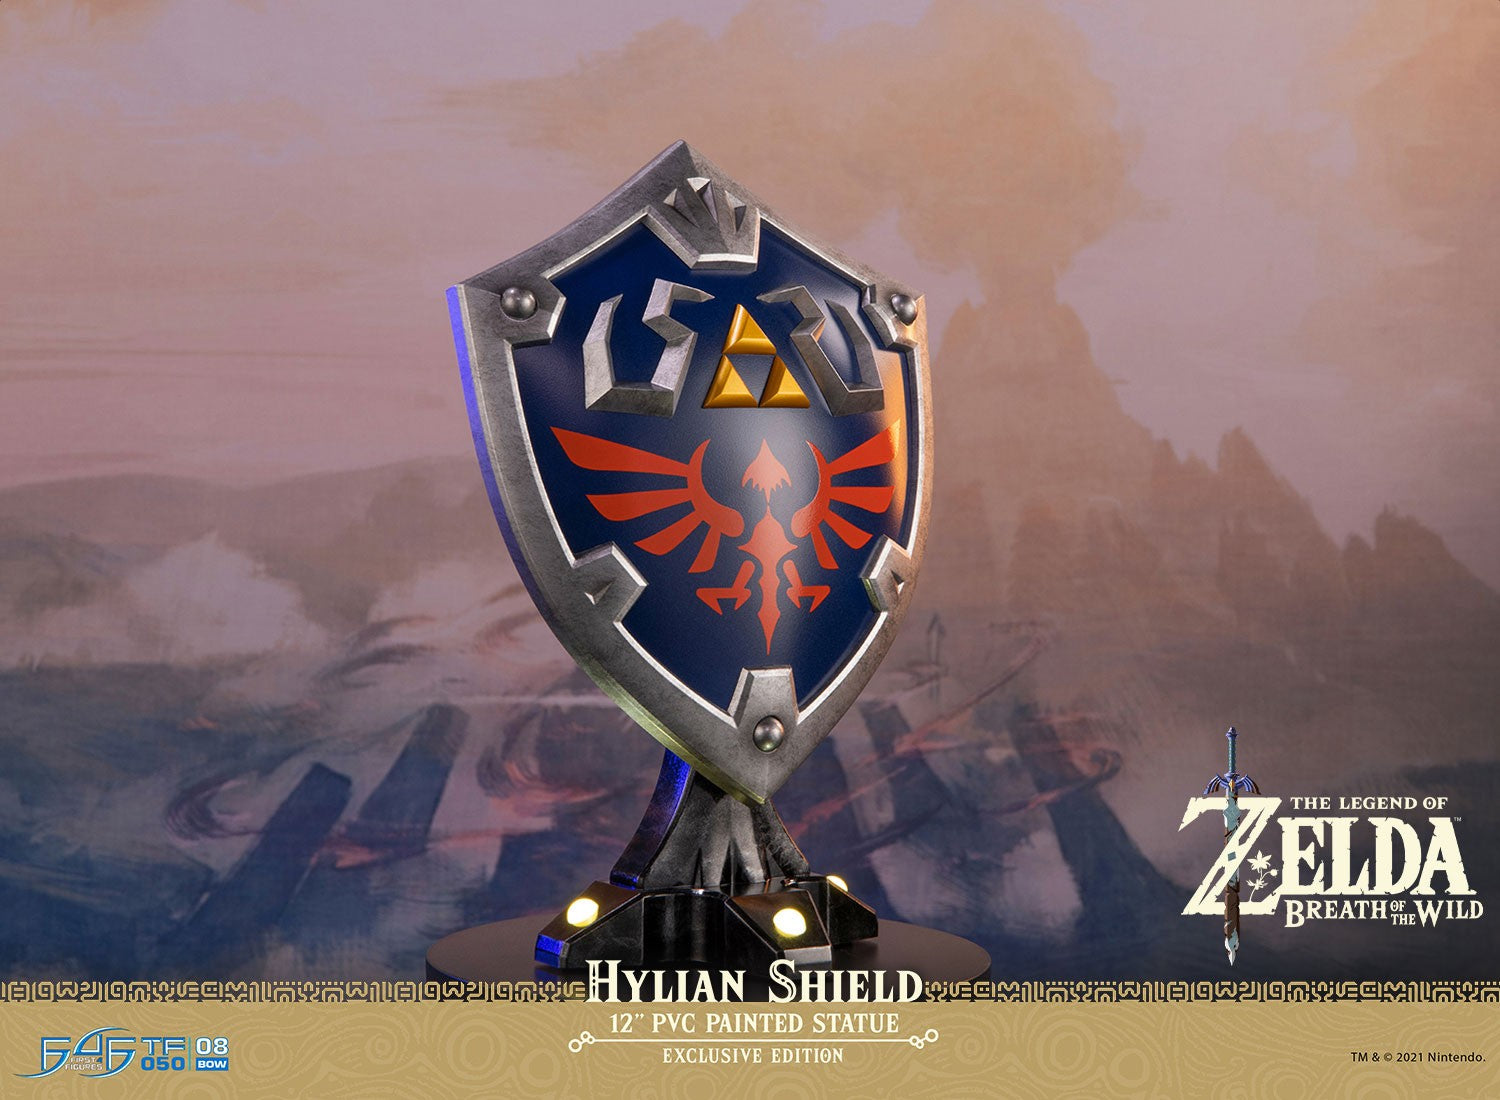 The Legend Of Zelda Breath Of The Wild – Hylian Shield Exclusive Edition